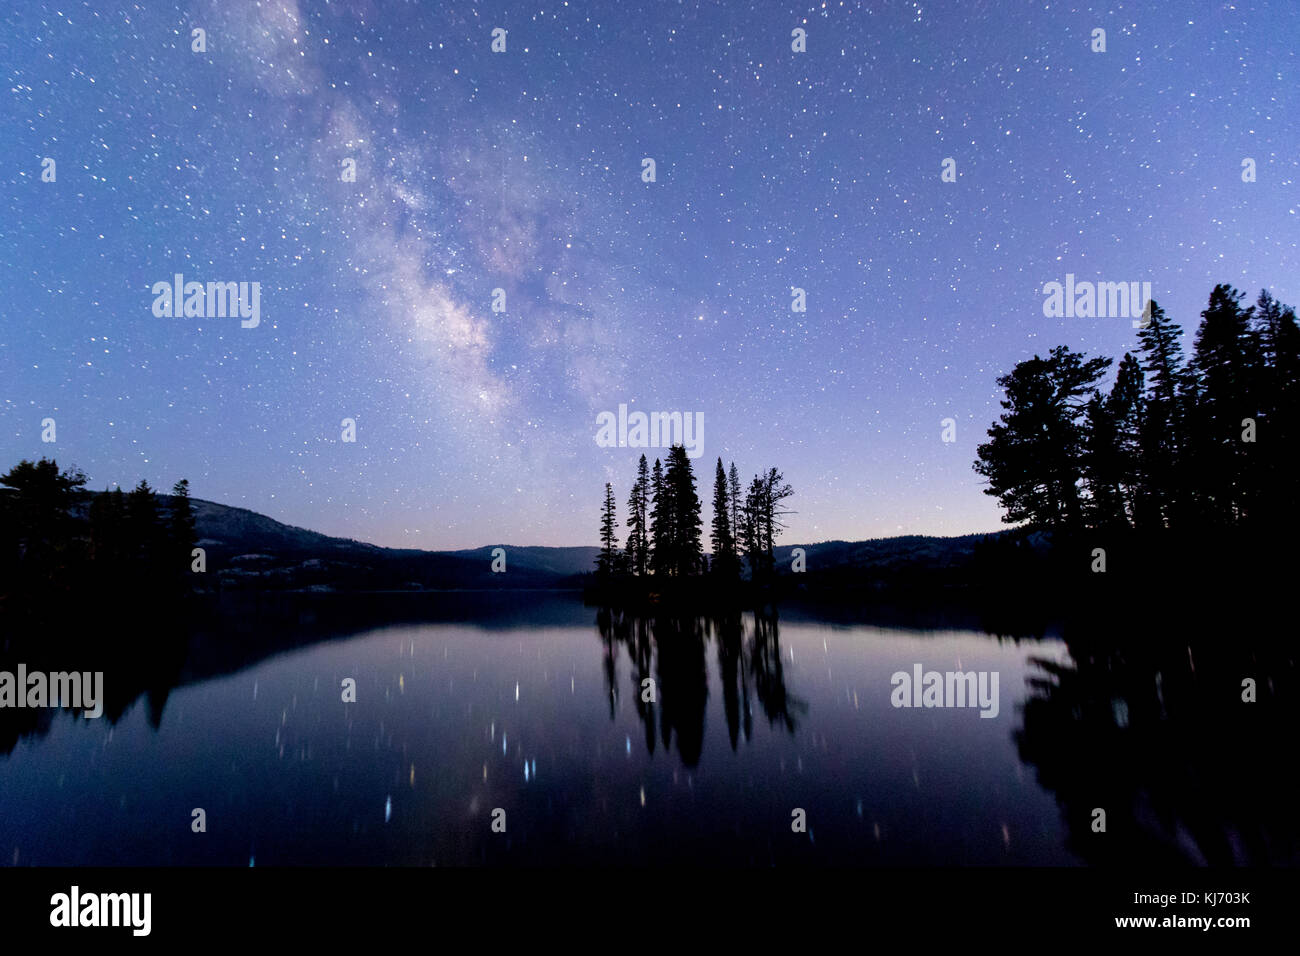 The Milky Way and stars reflected in Silver Lake in Amador County, California Stock Photo